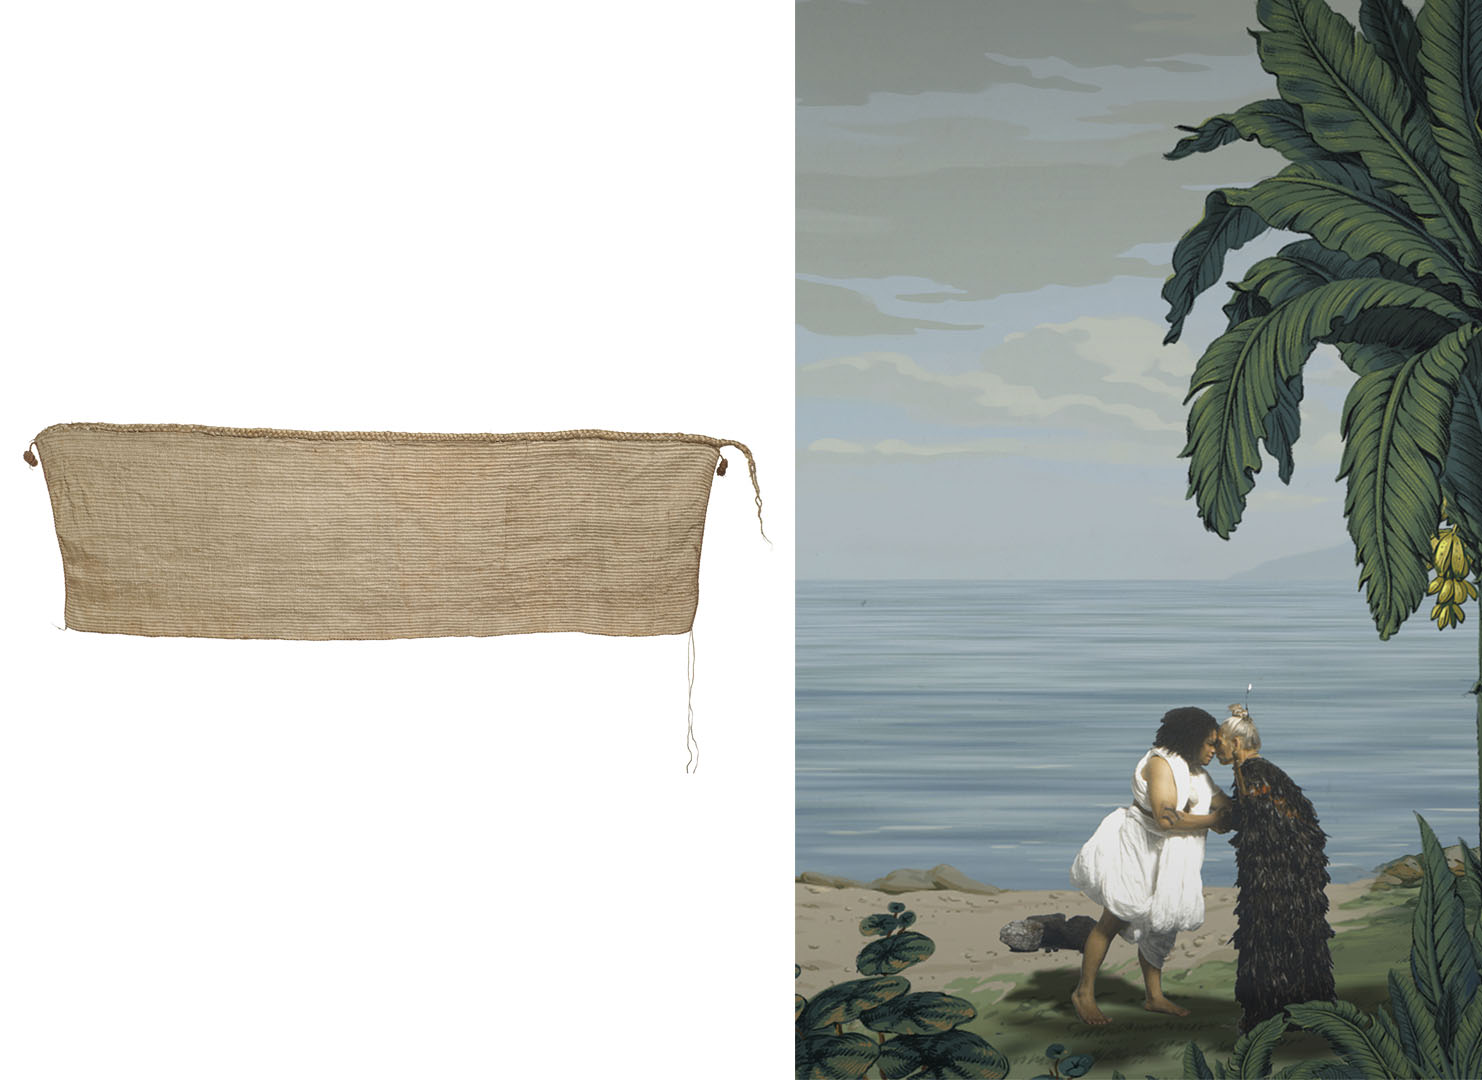 On the left is a woven cloak, on the right is a still from in Pursuit of Venus [infected] showing two people participating in a hongi